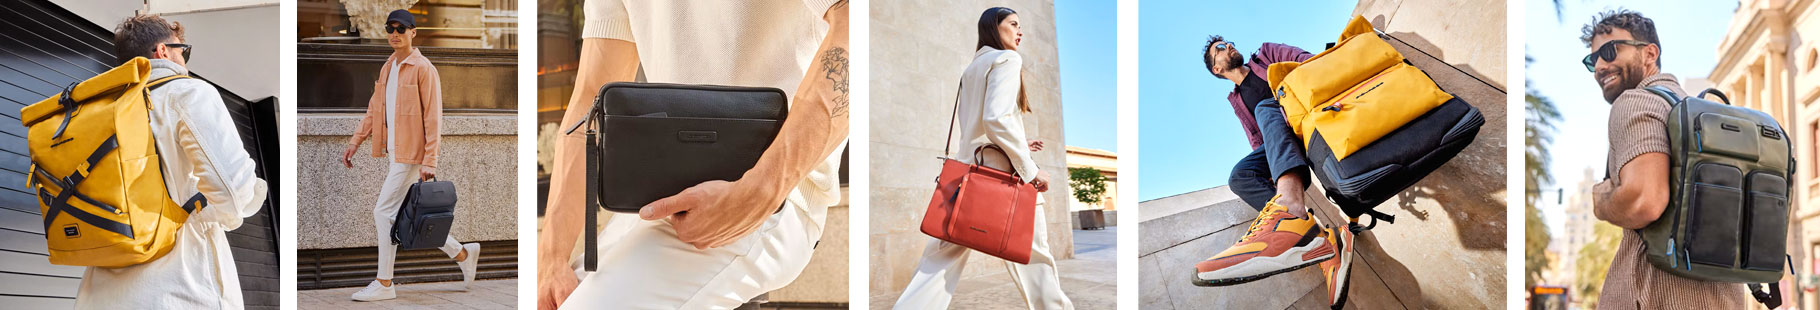 PIQUADRO bags, briefcases, backpacks and accessories, shop online 